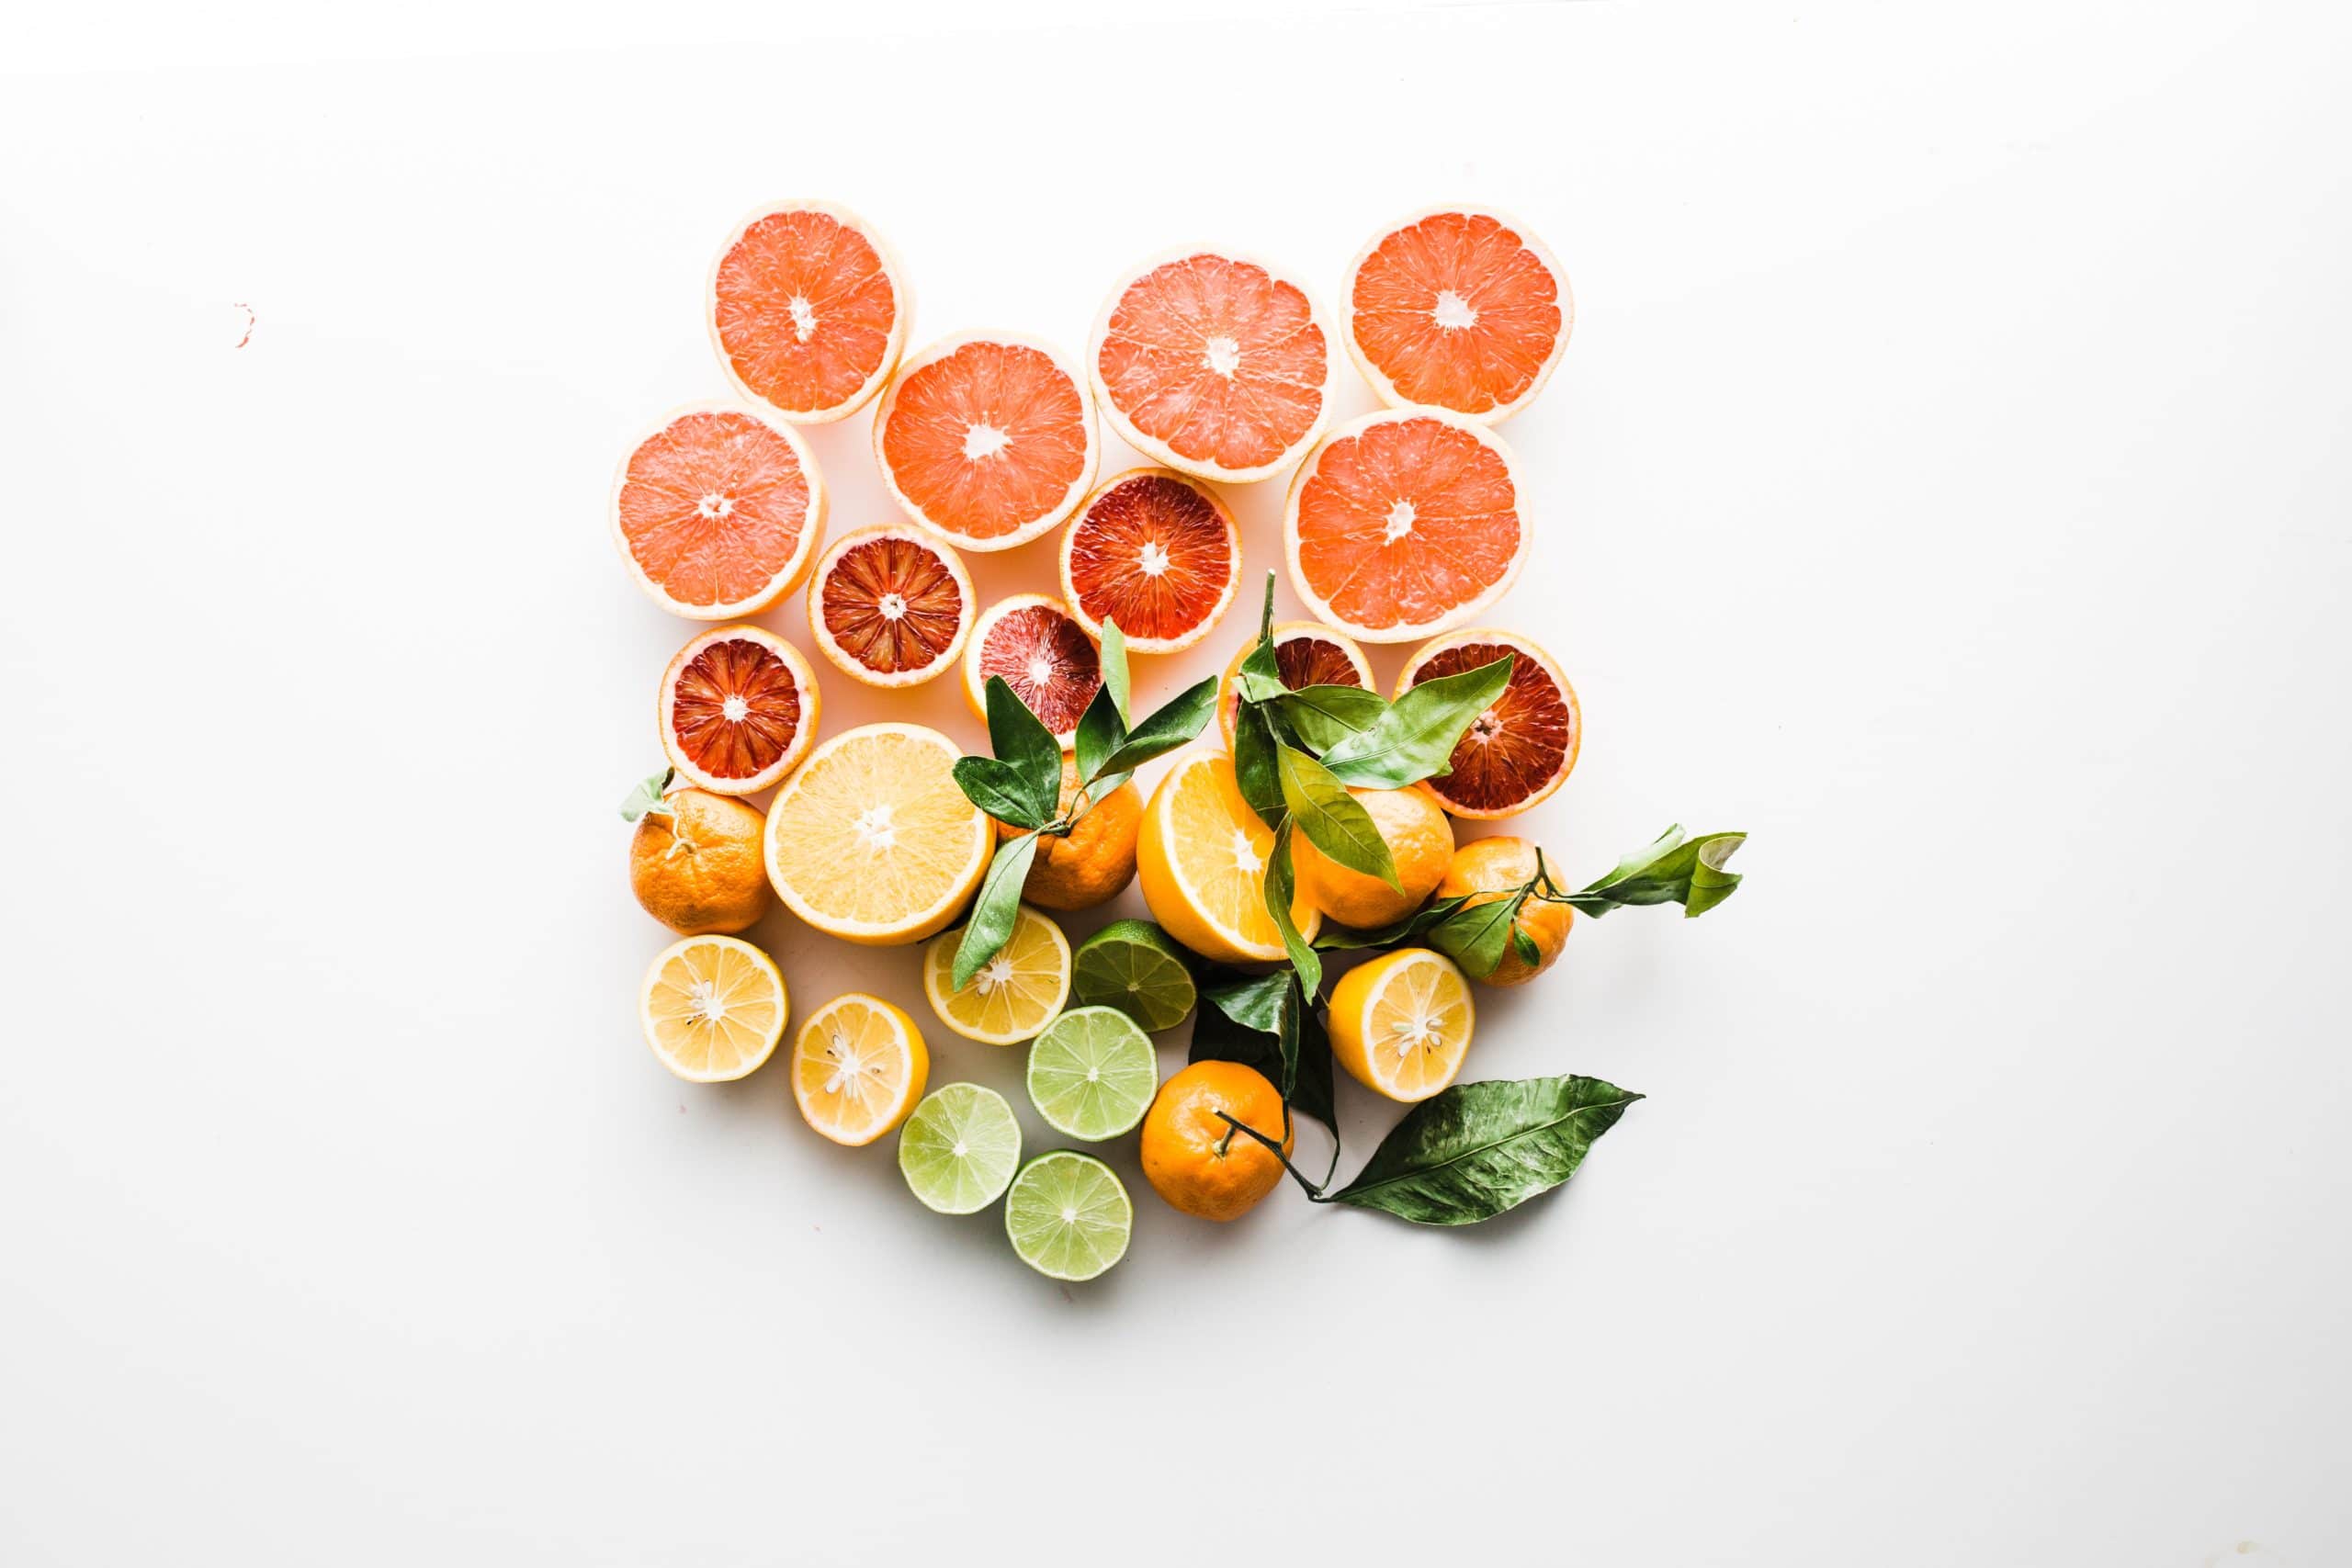 grapefruit, oranges and limes on a light background